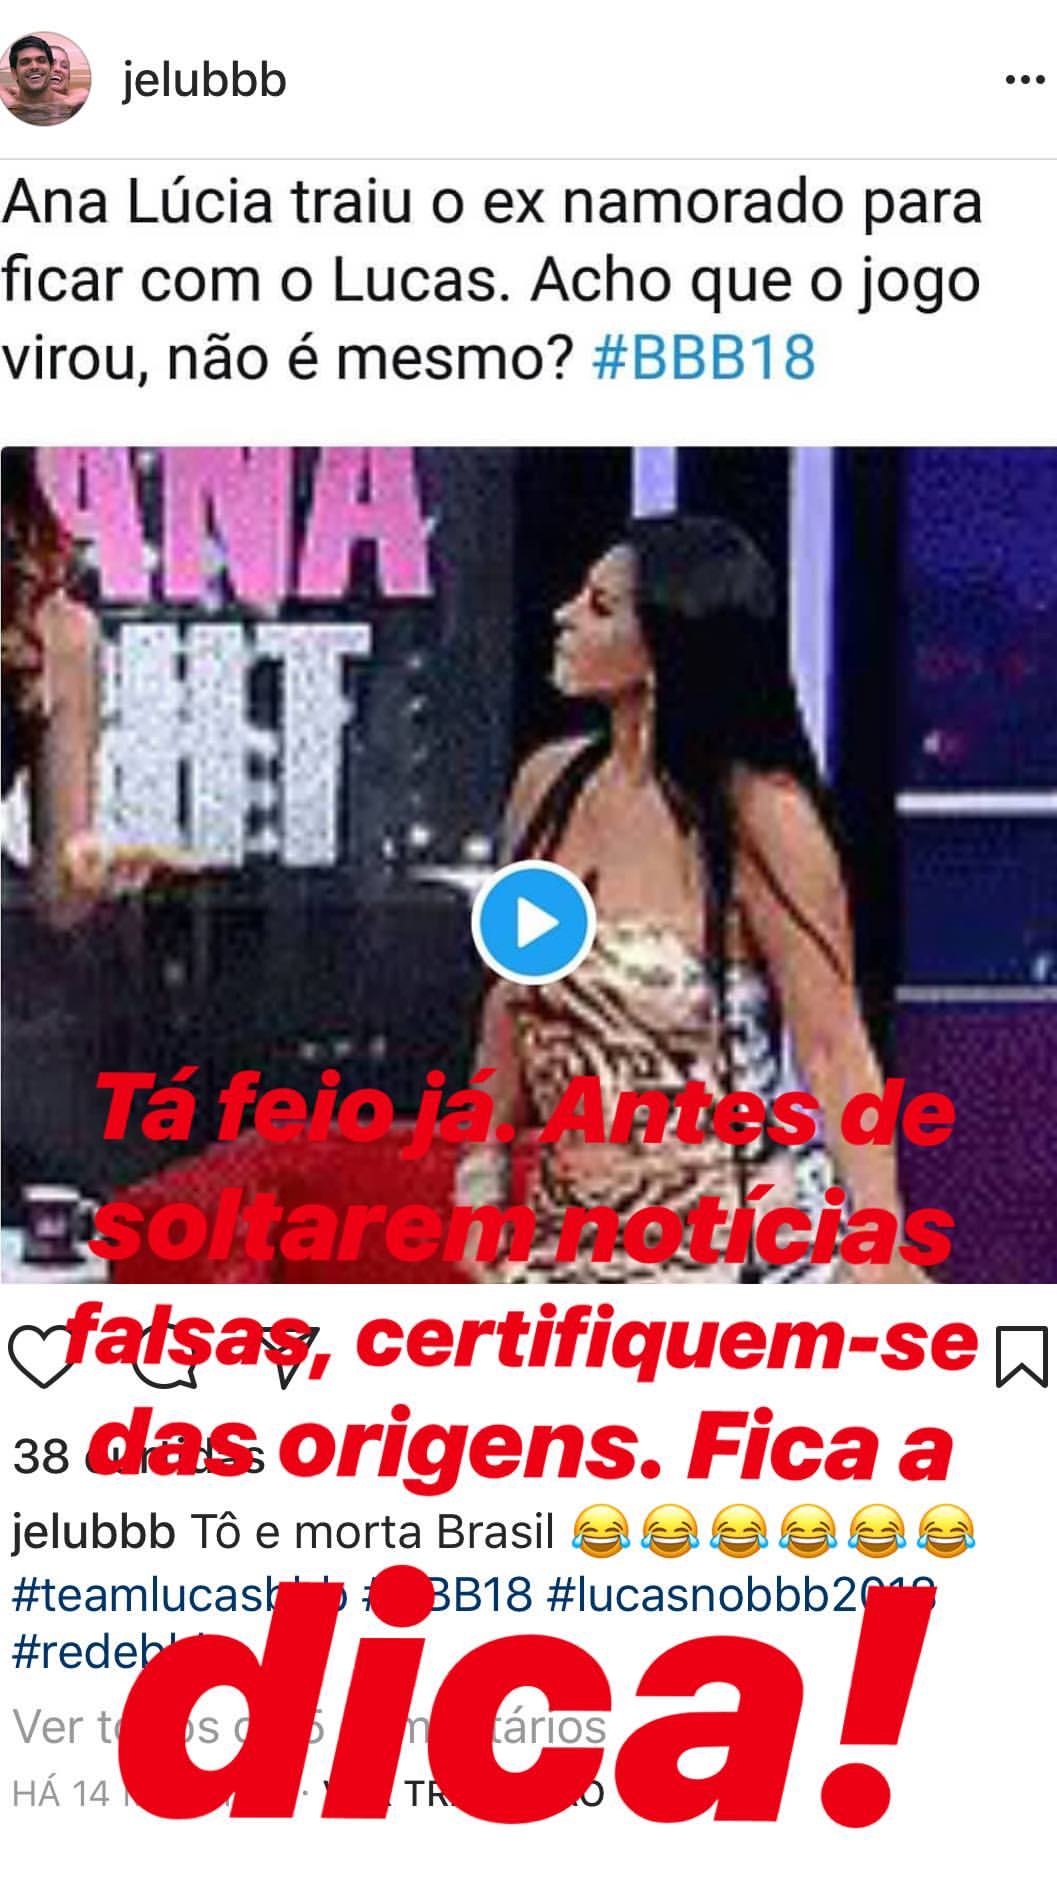 bbb18-analucia